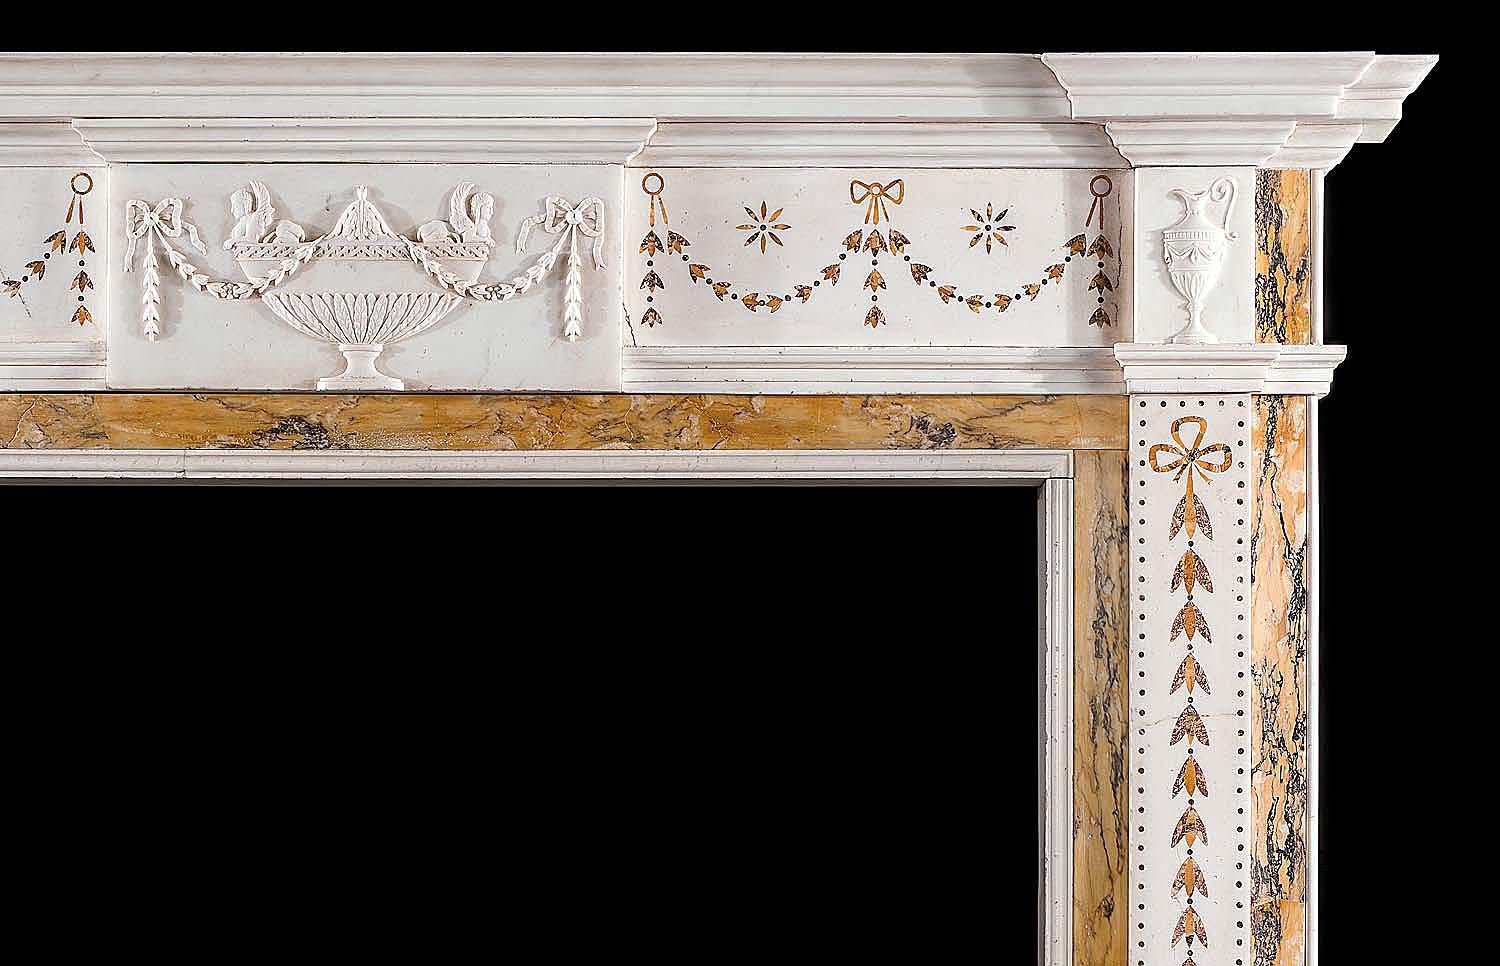 An elegant 20th century Georgian style chimneypiece in statuary and inlaid sienna
and brocatelle marble. The frieze beneath the breakfront shelf embellished
with inlaid sienna festoons and centred by a tablet of a lidded urn surmounted by
a pair